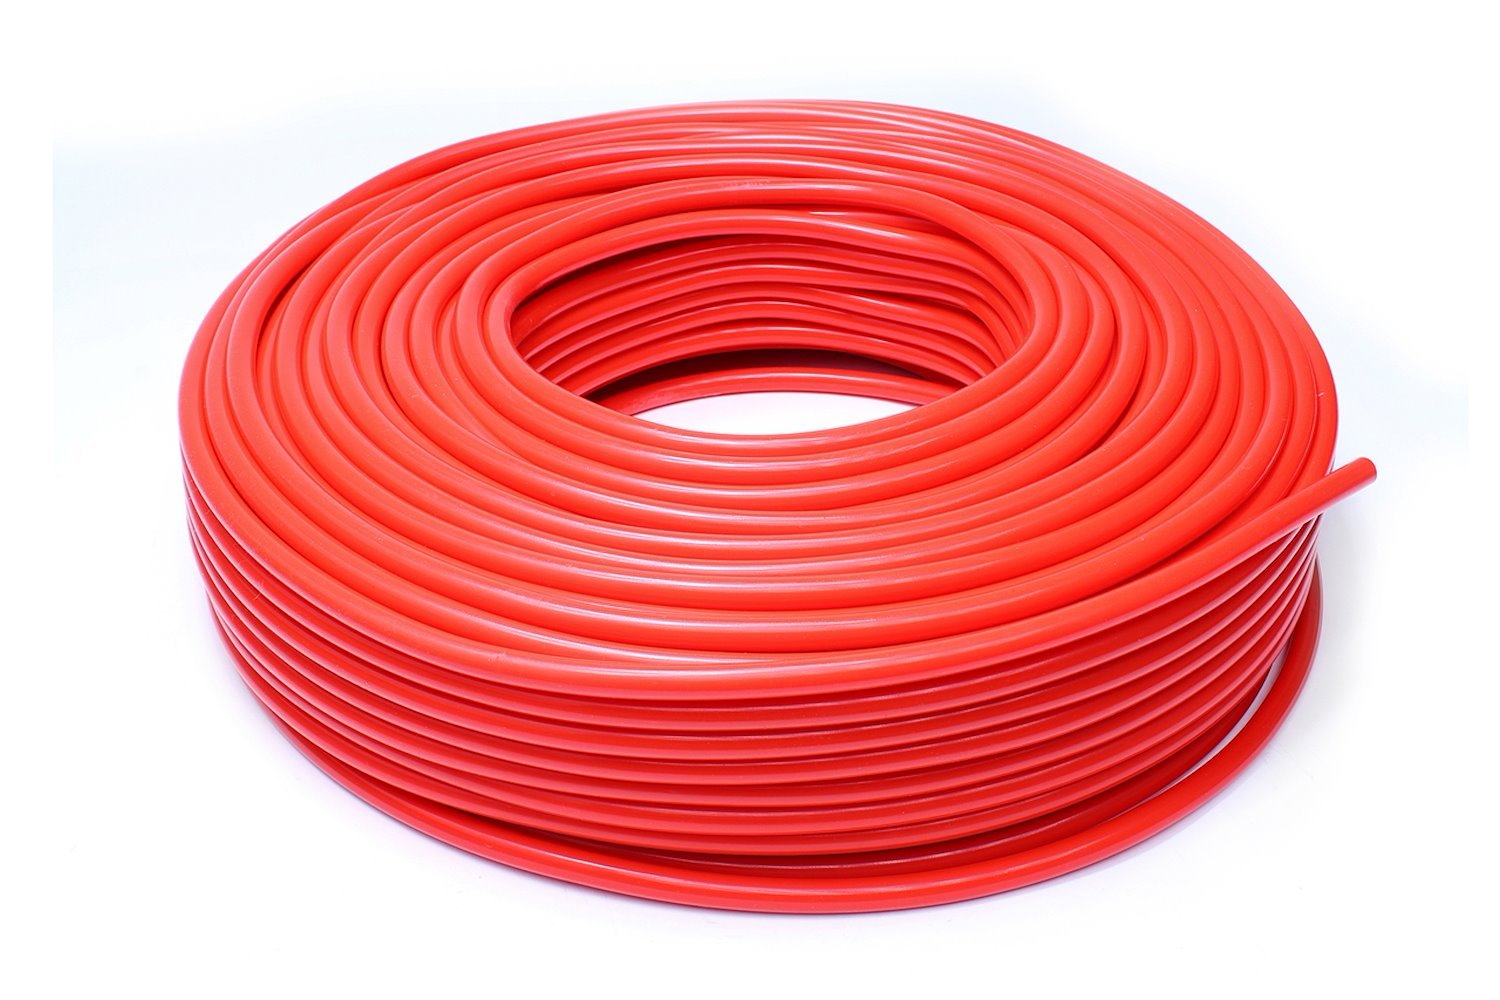 HTSVH8-REDx50 High-Temperature Silicone Vacuum Hose Tubing, 5/16 in. ID, 50 ft. Roll, Red